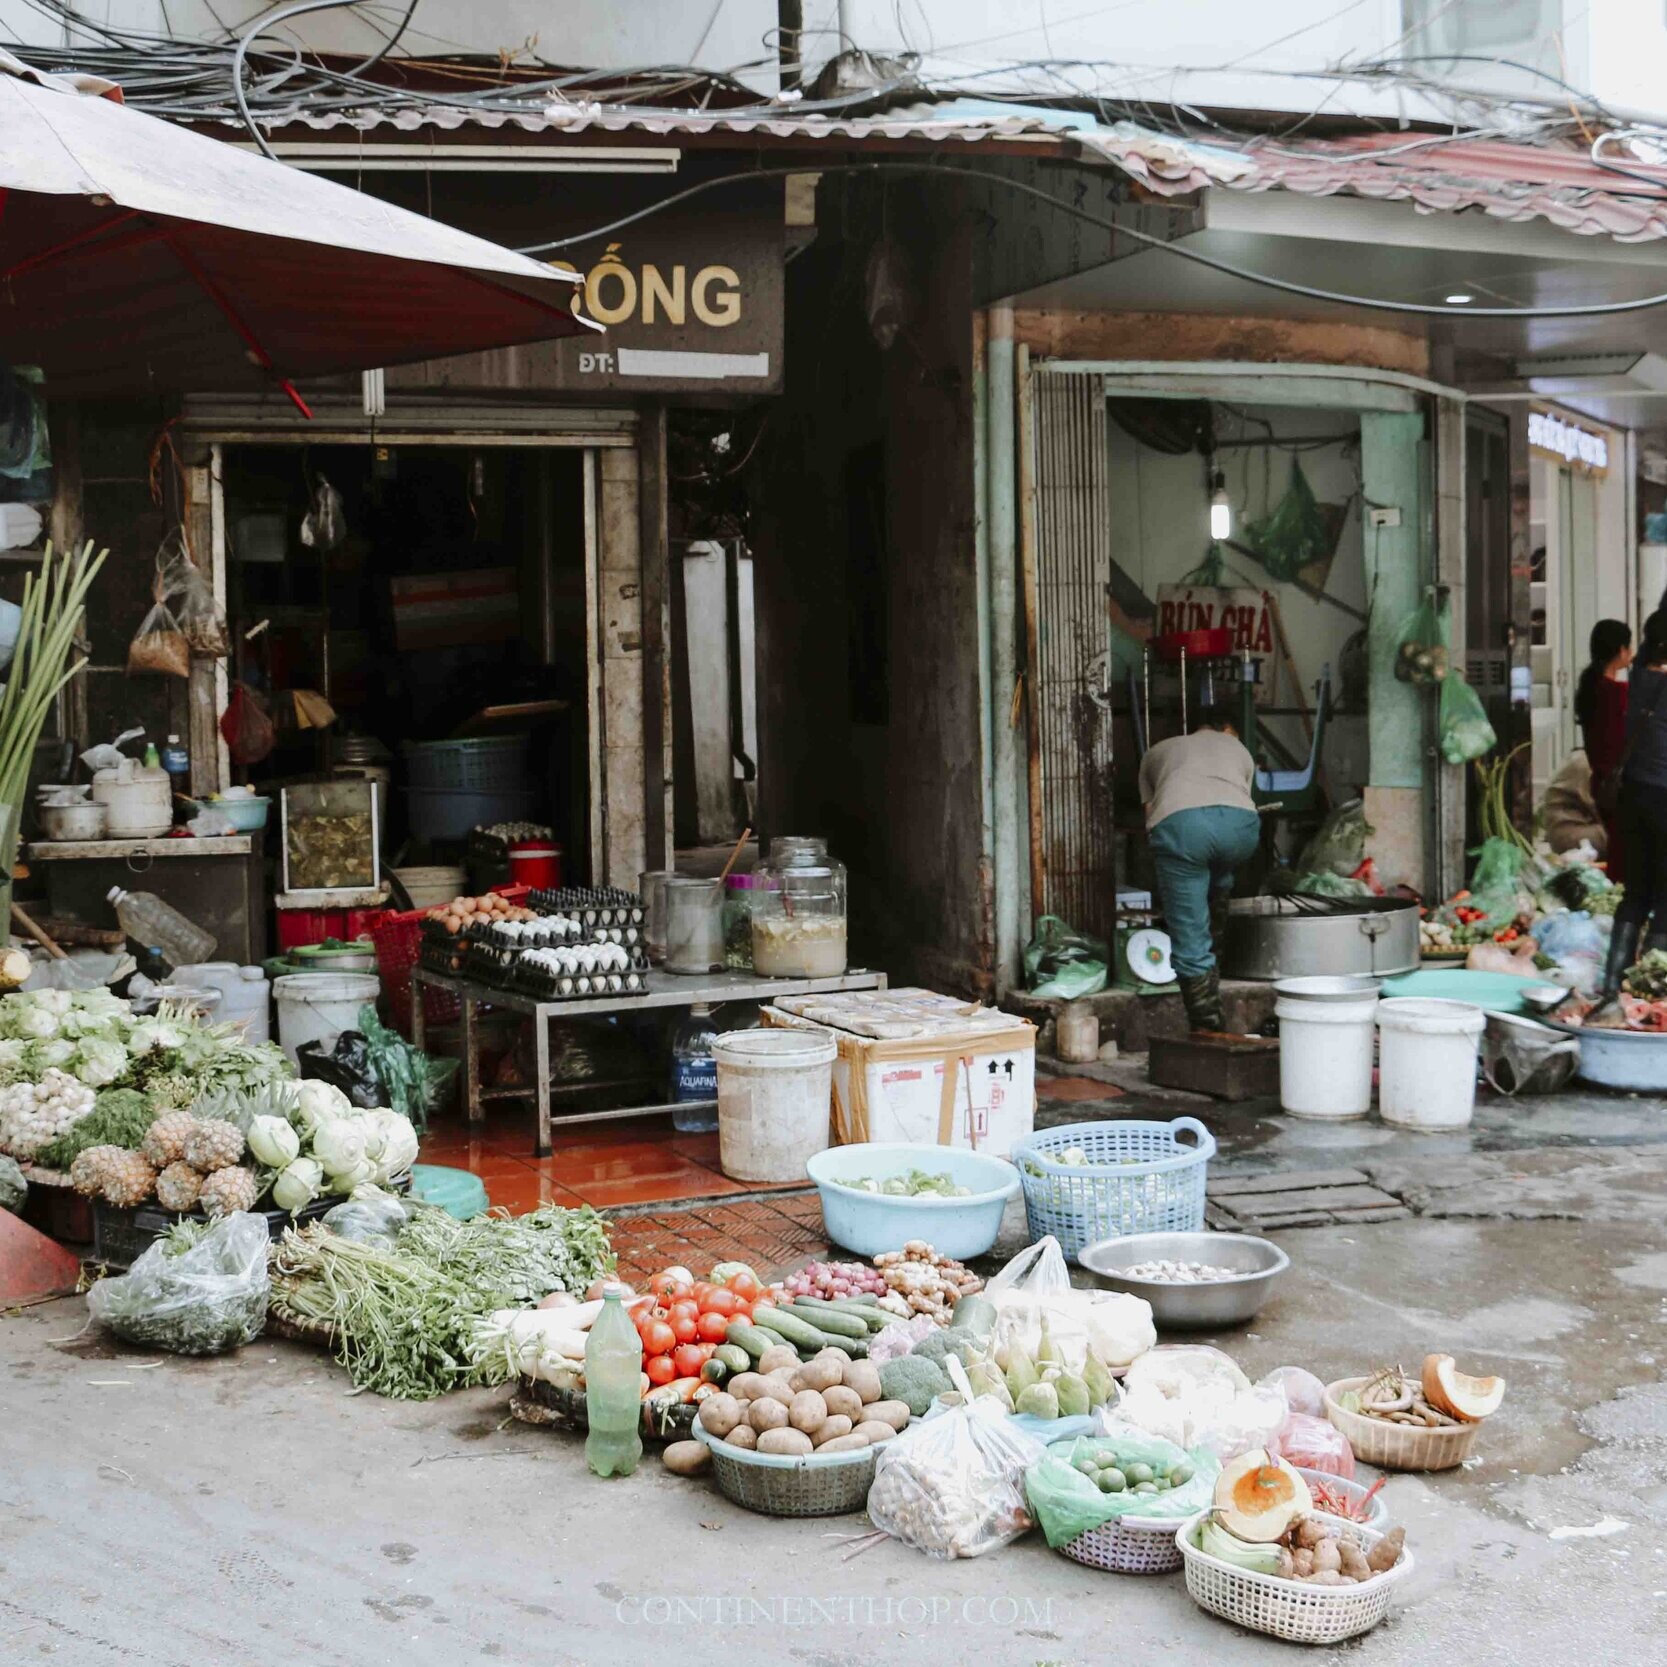 A woman selling vegetables on the street in Hanoi